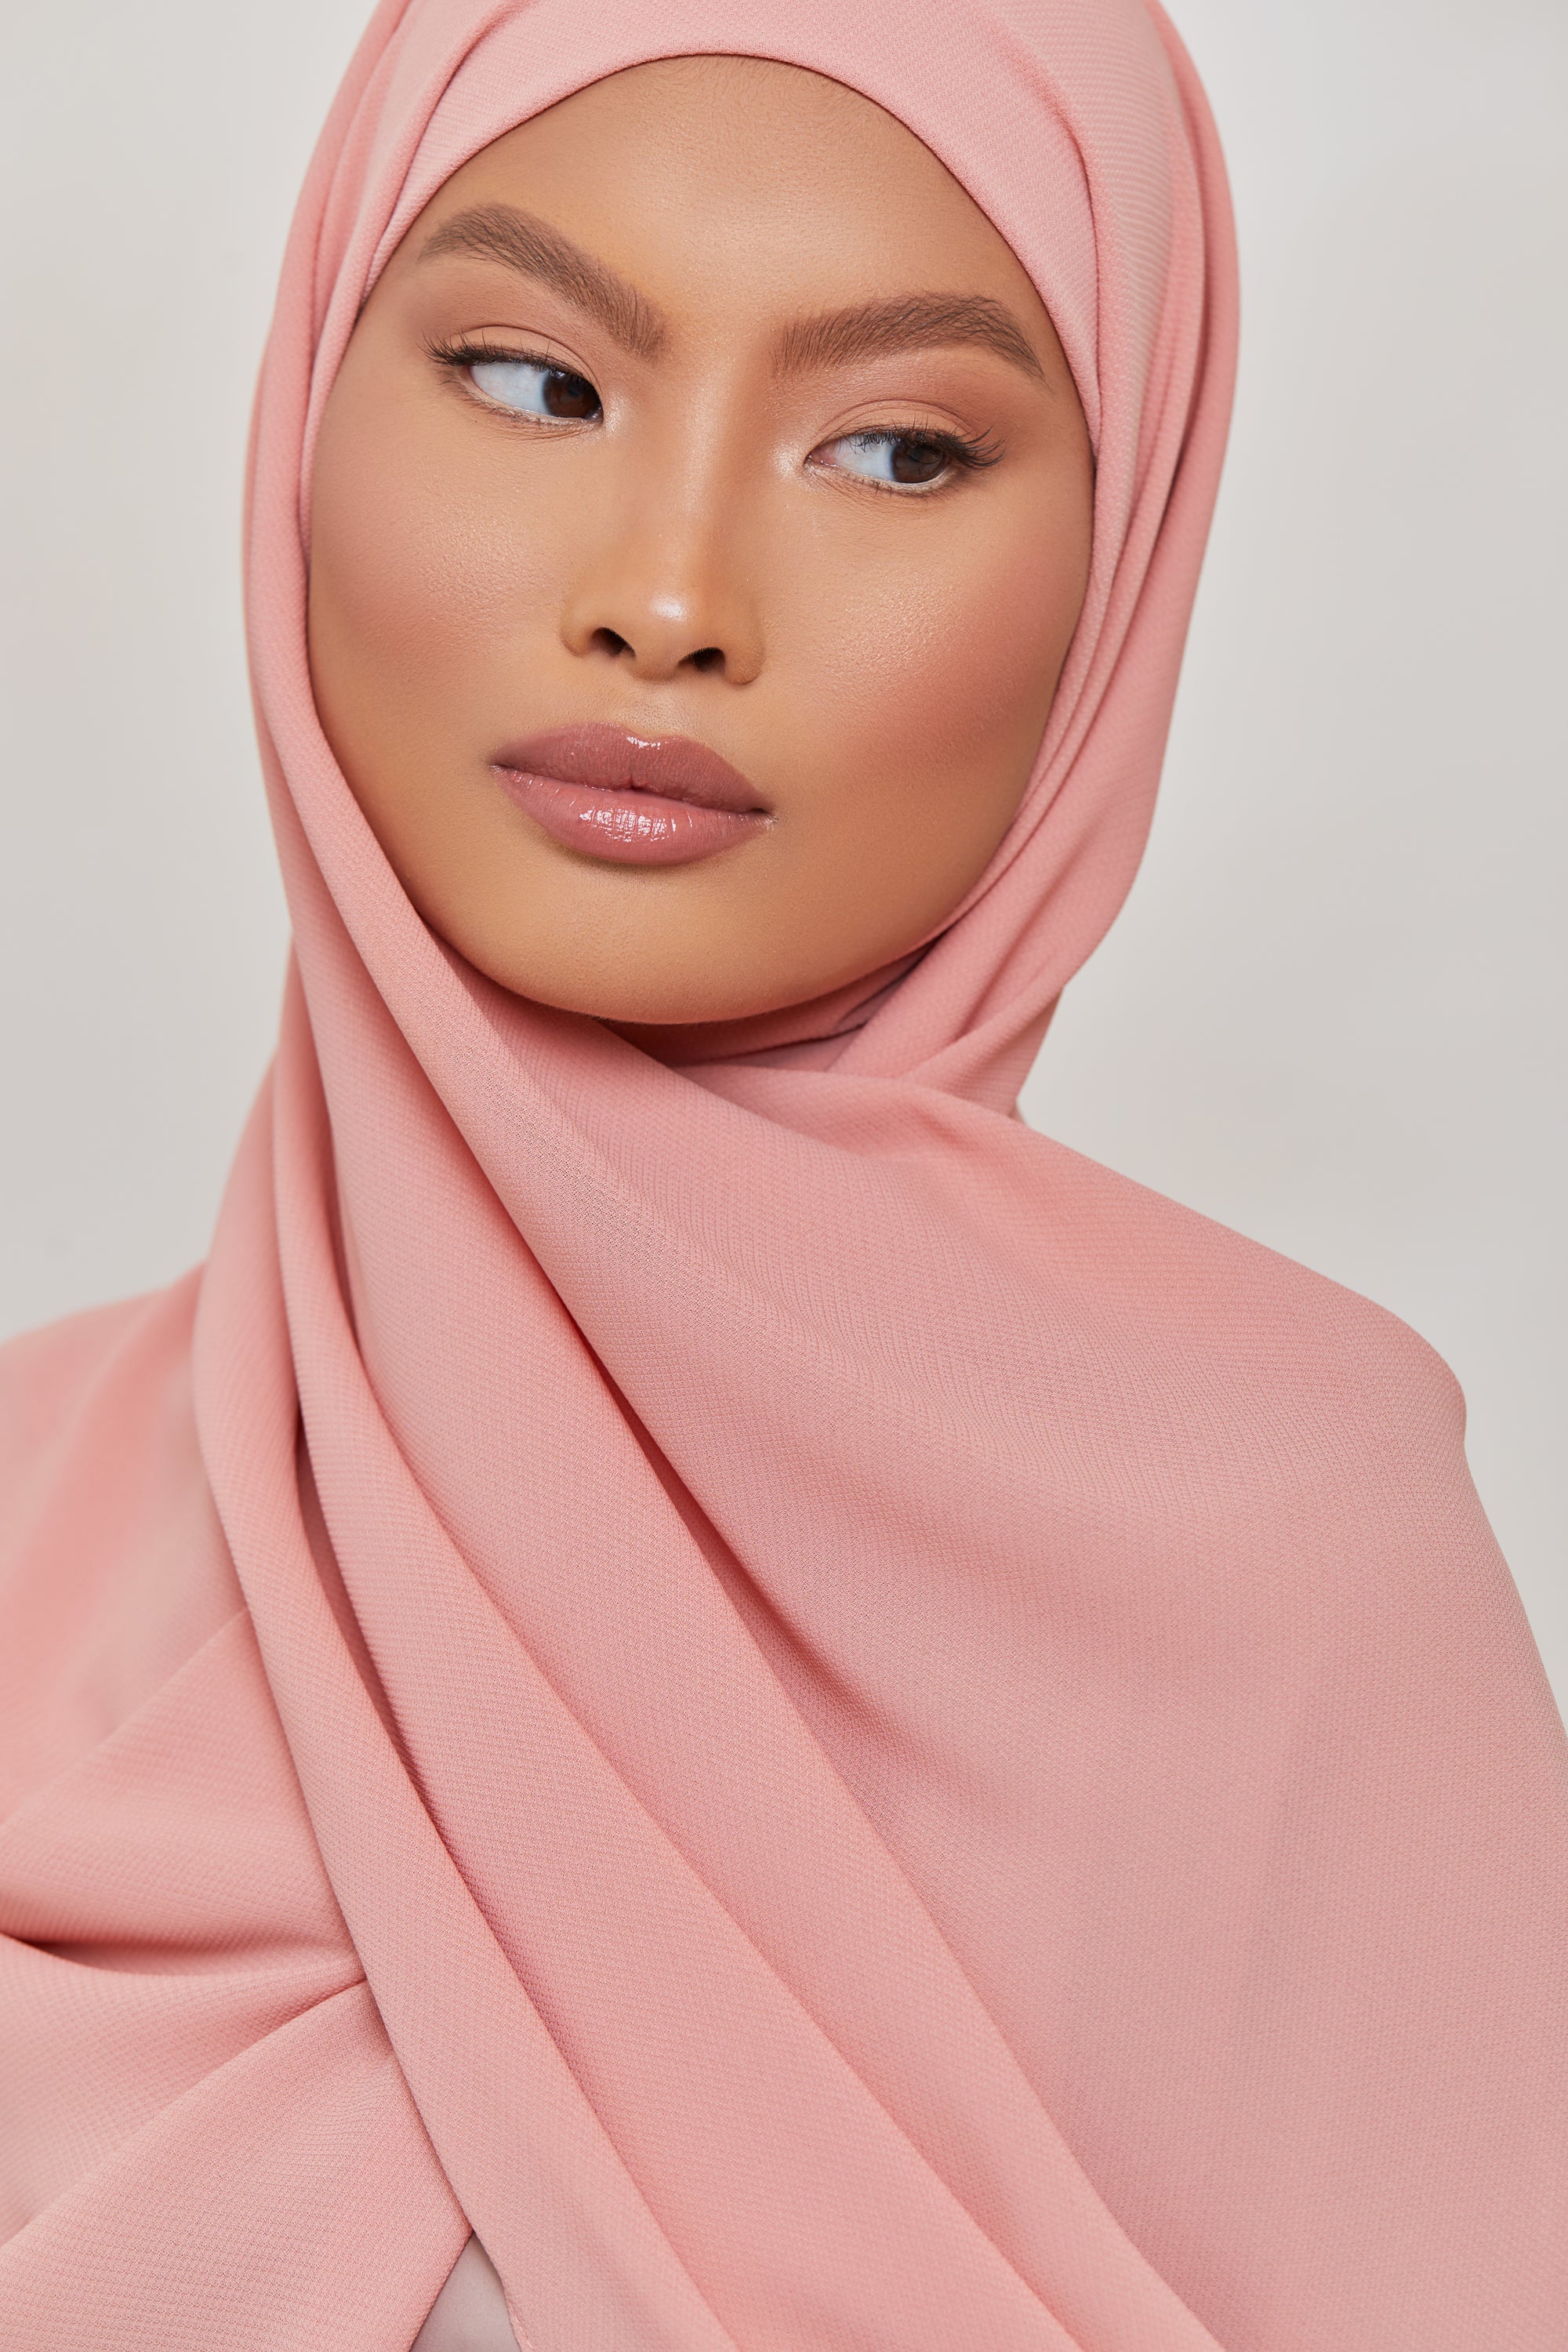 TEXTURE Twill Chiffon Hijab - Flushed Veiled Collection 